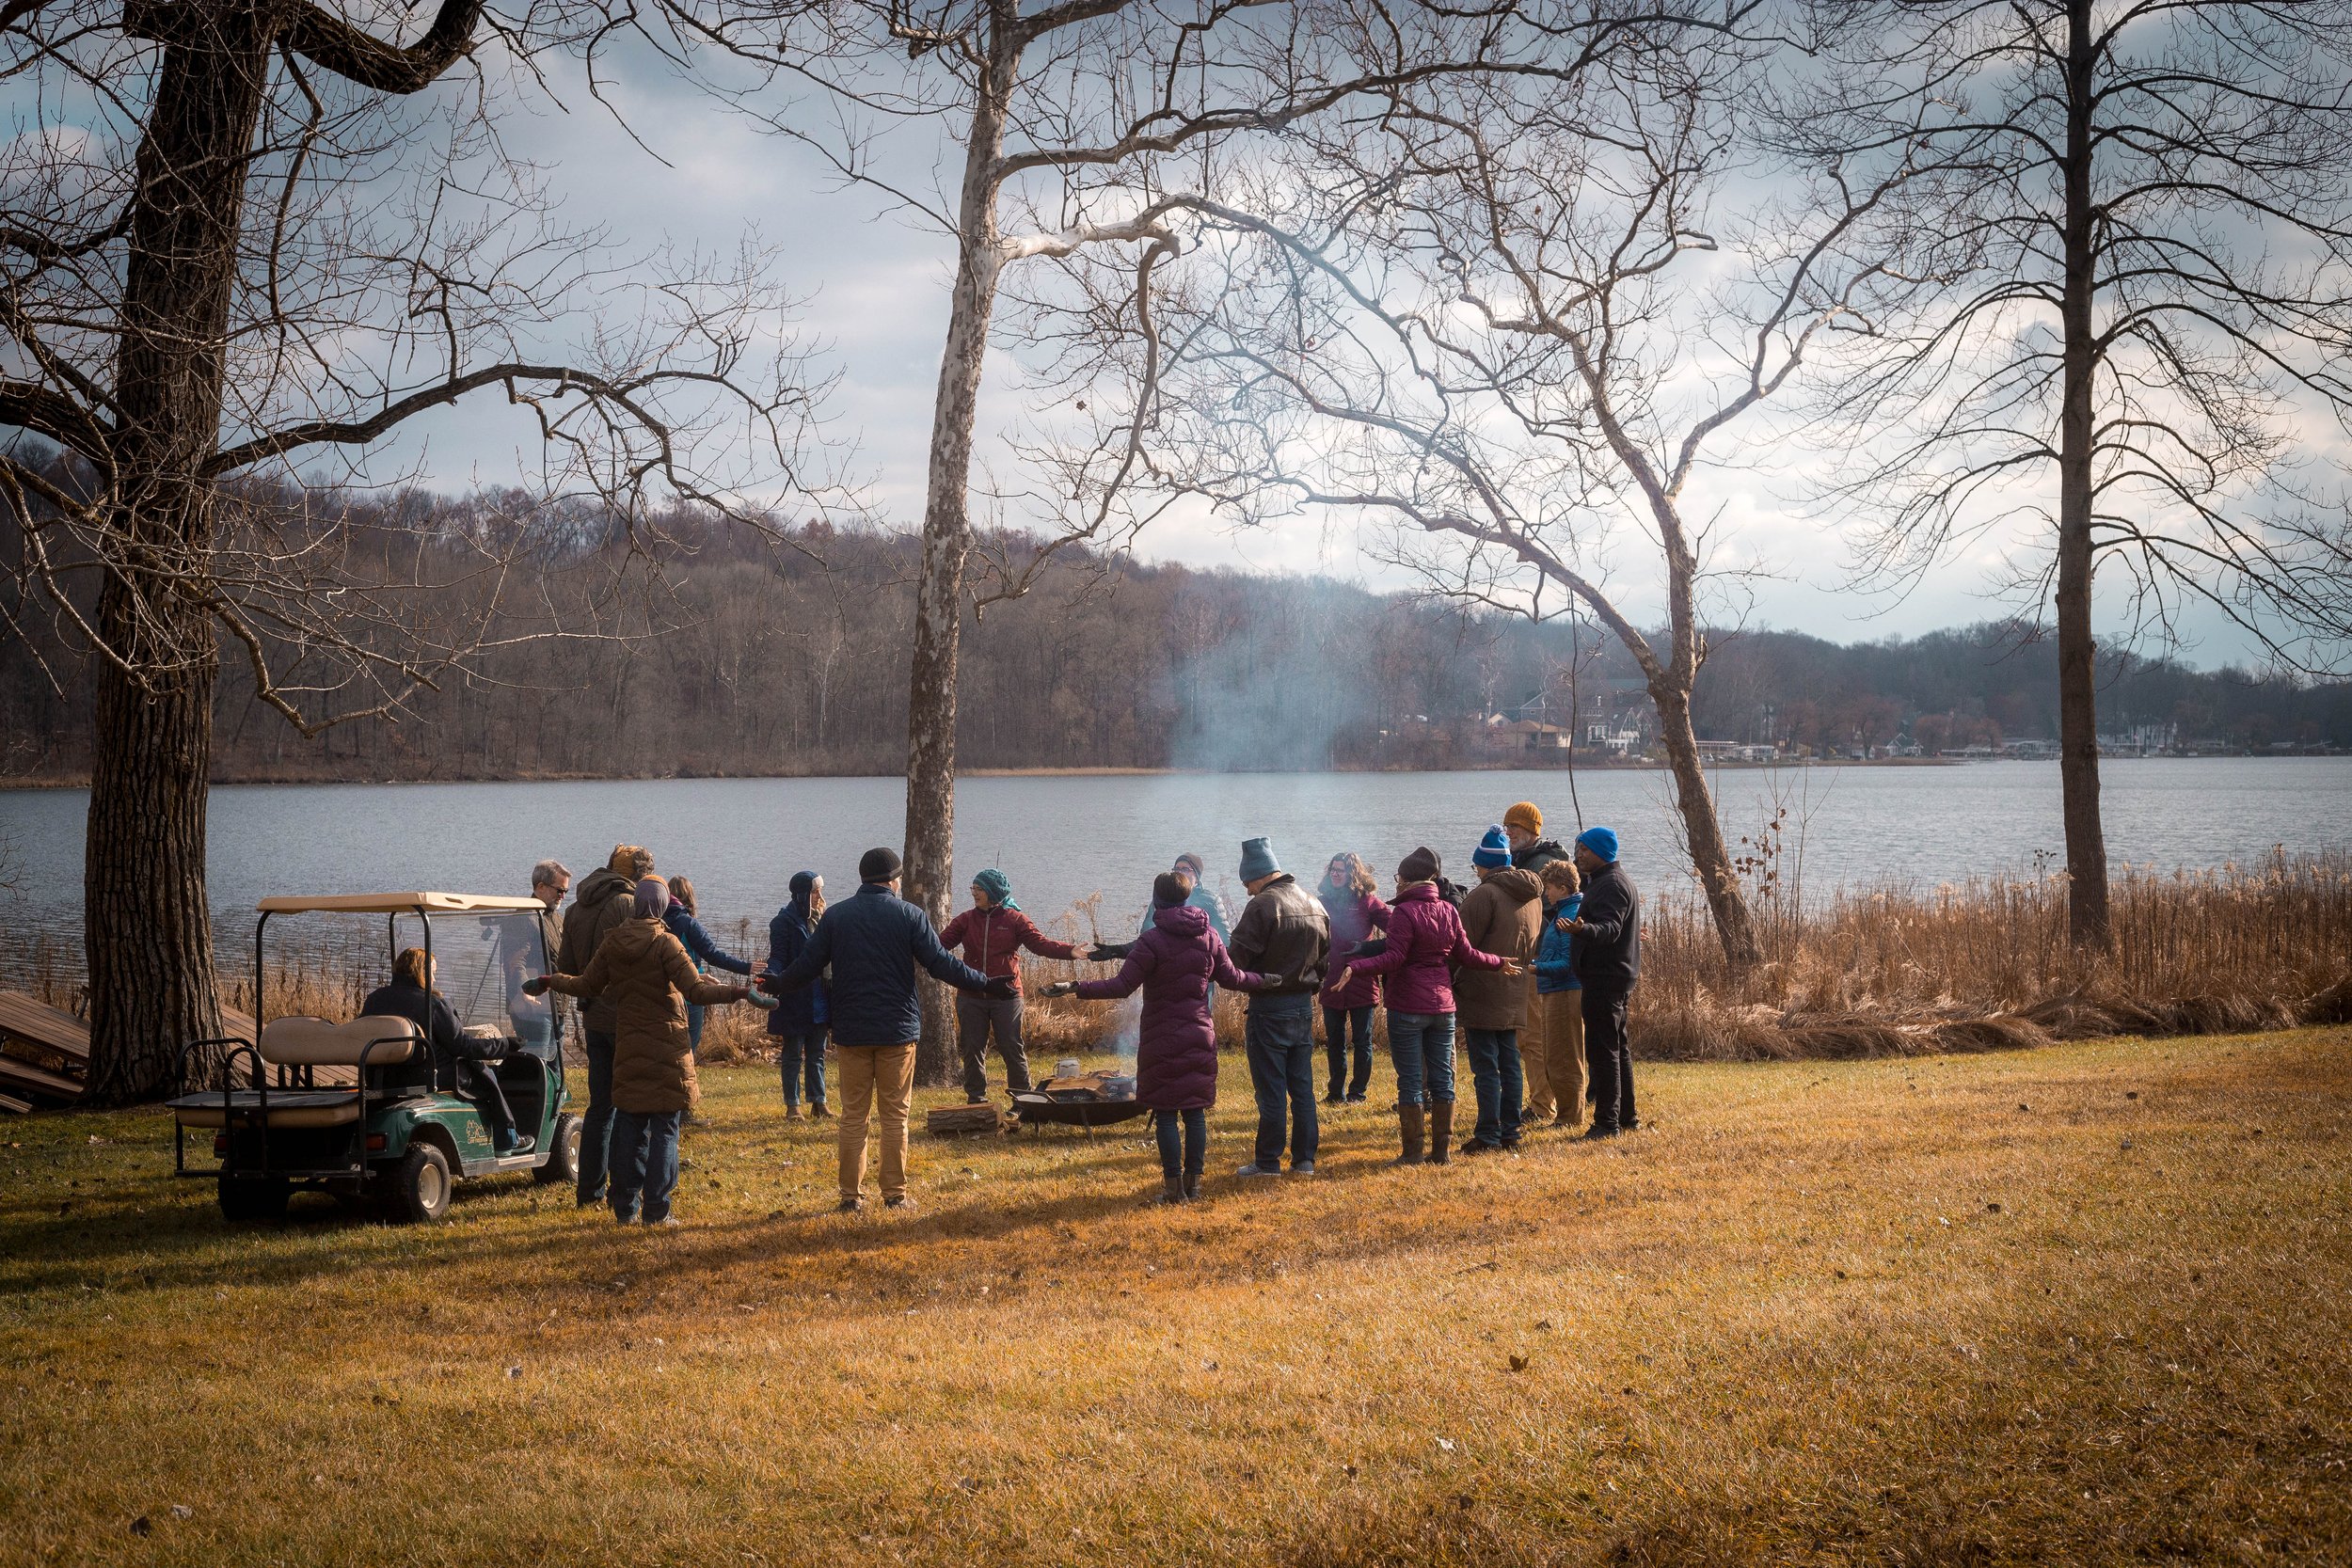  The PCC cohort gathered for worship on the lakeside. 